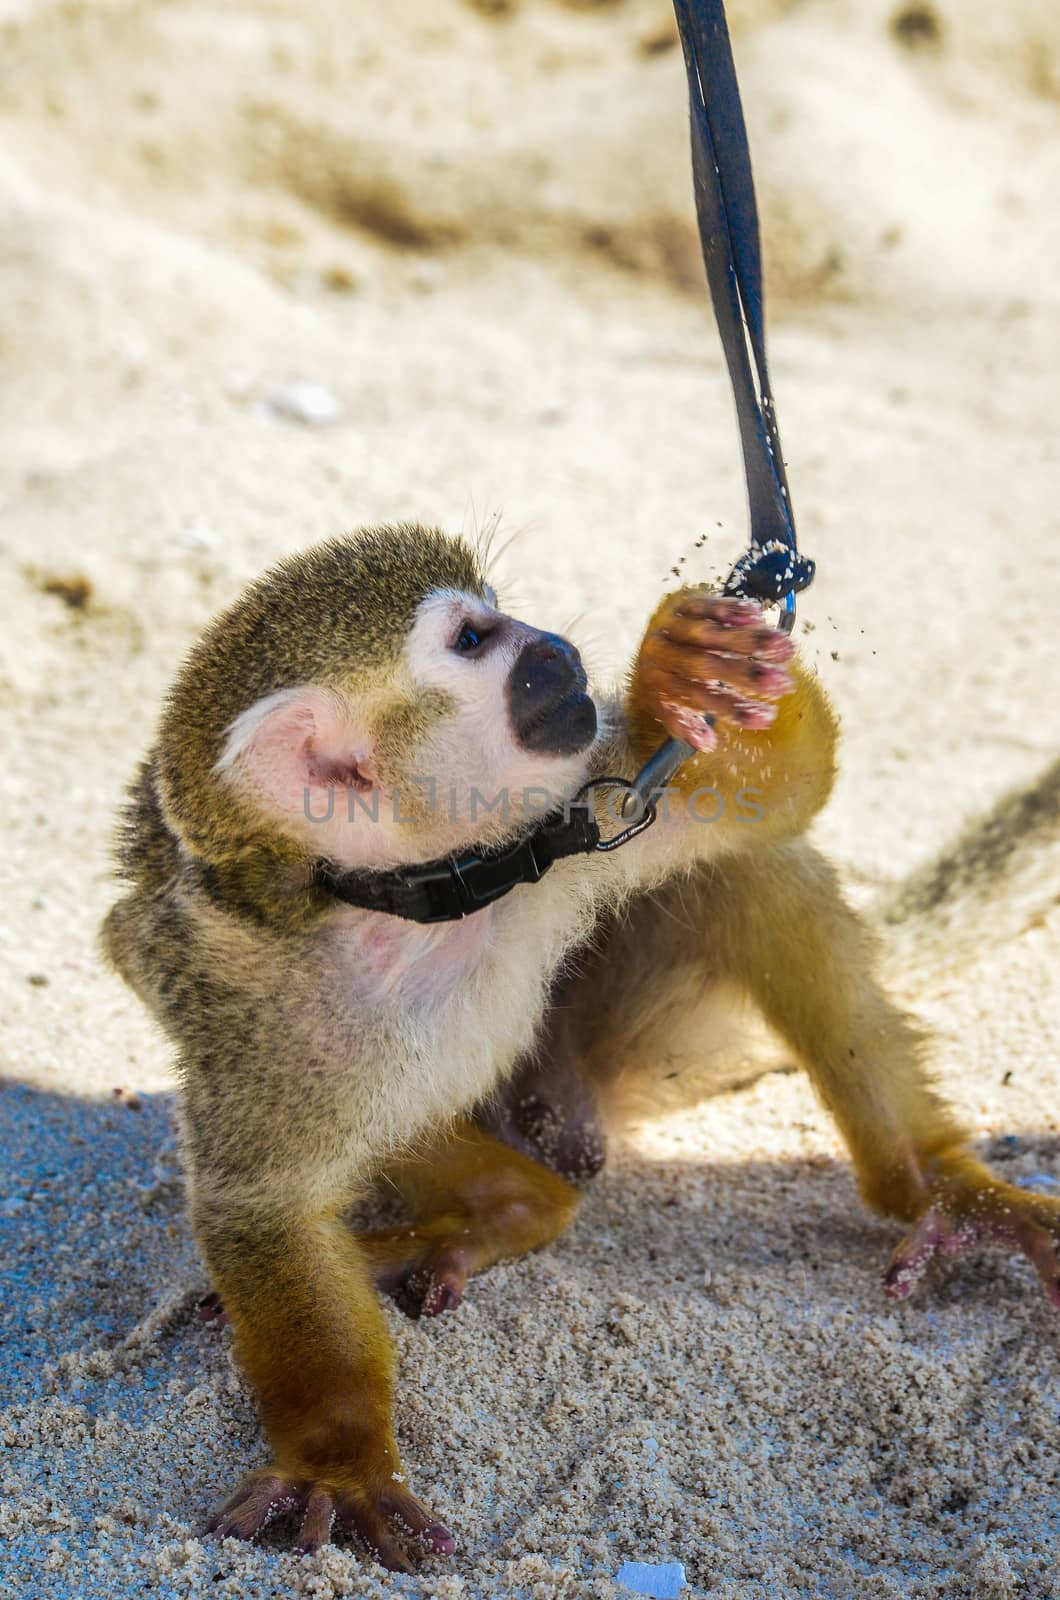 Spider monkey or Ateles kept on a leash on the beach